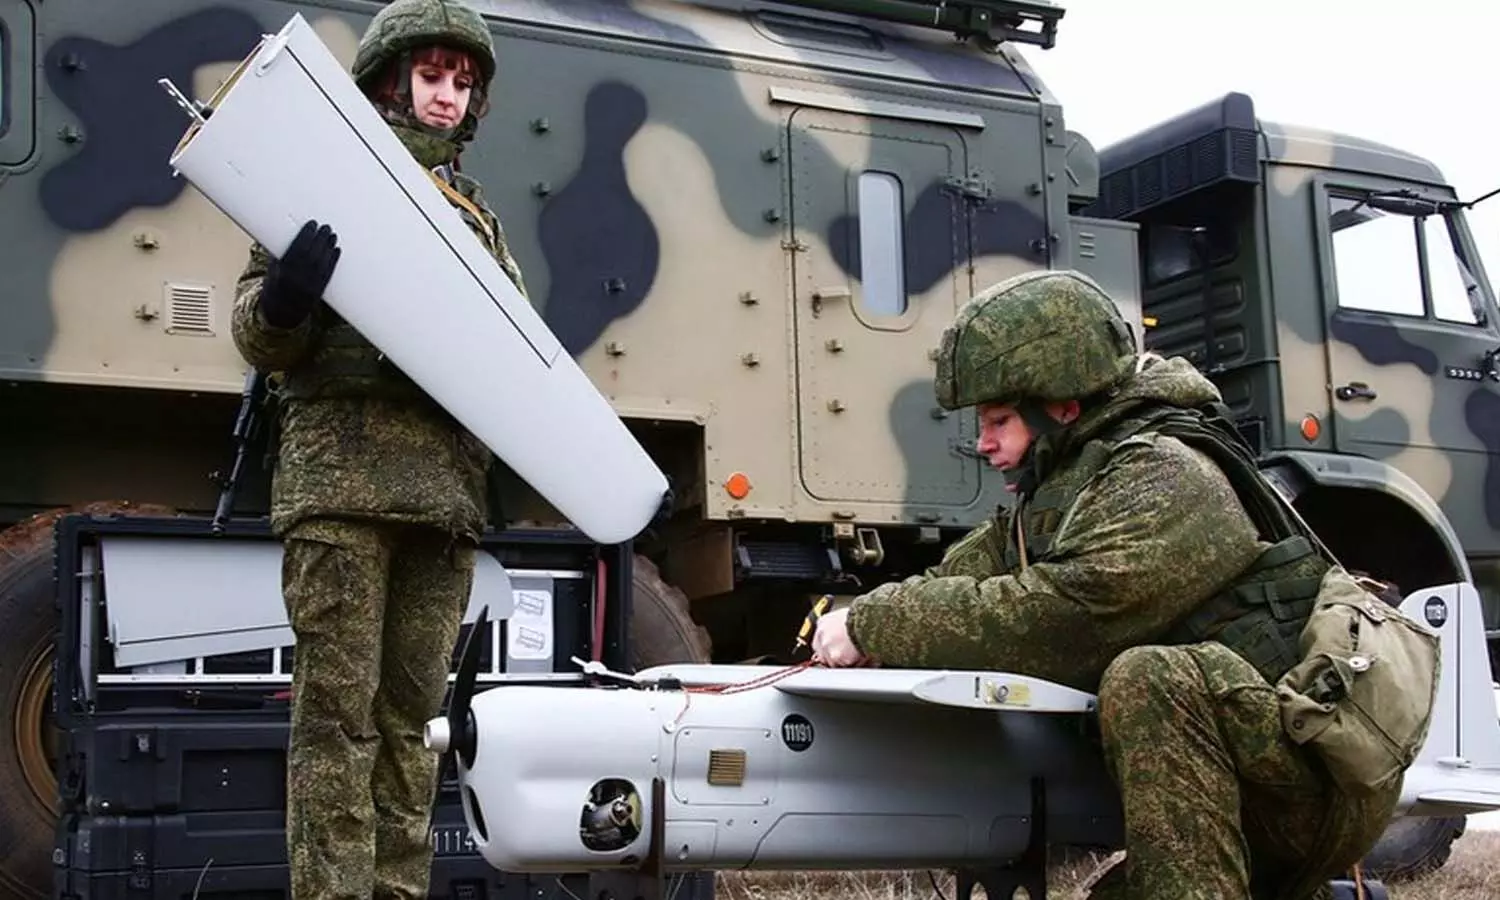 Russia-Ukraine War: Germany withdraws from giving arms to Ukraine, is also stopping NATO allies